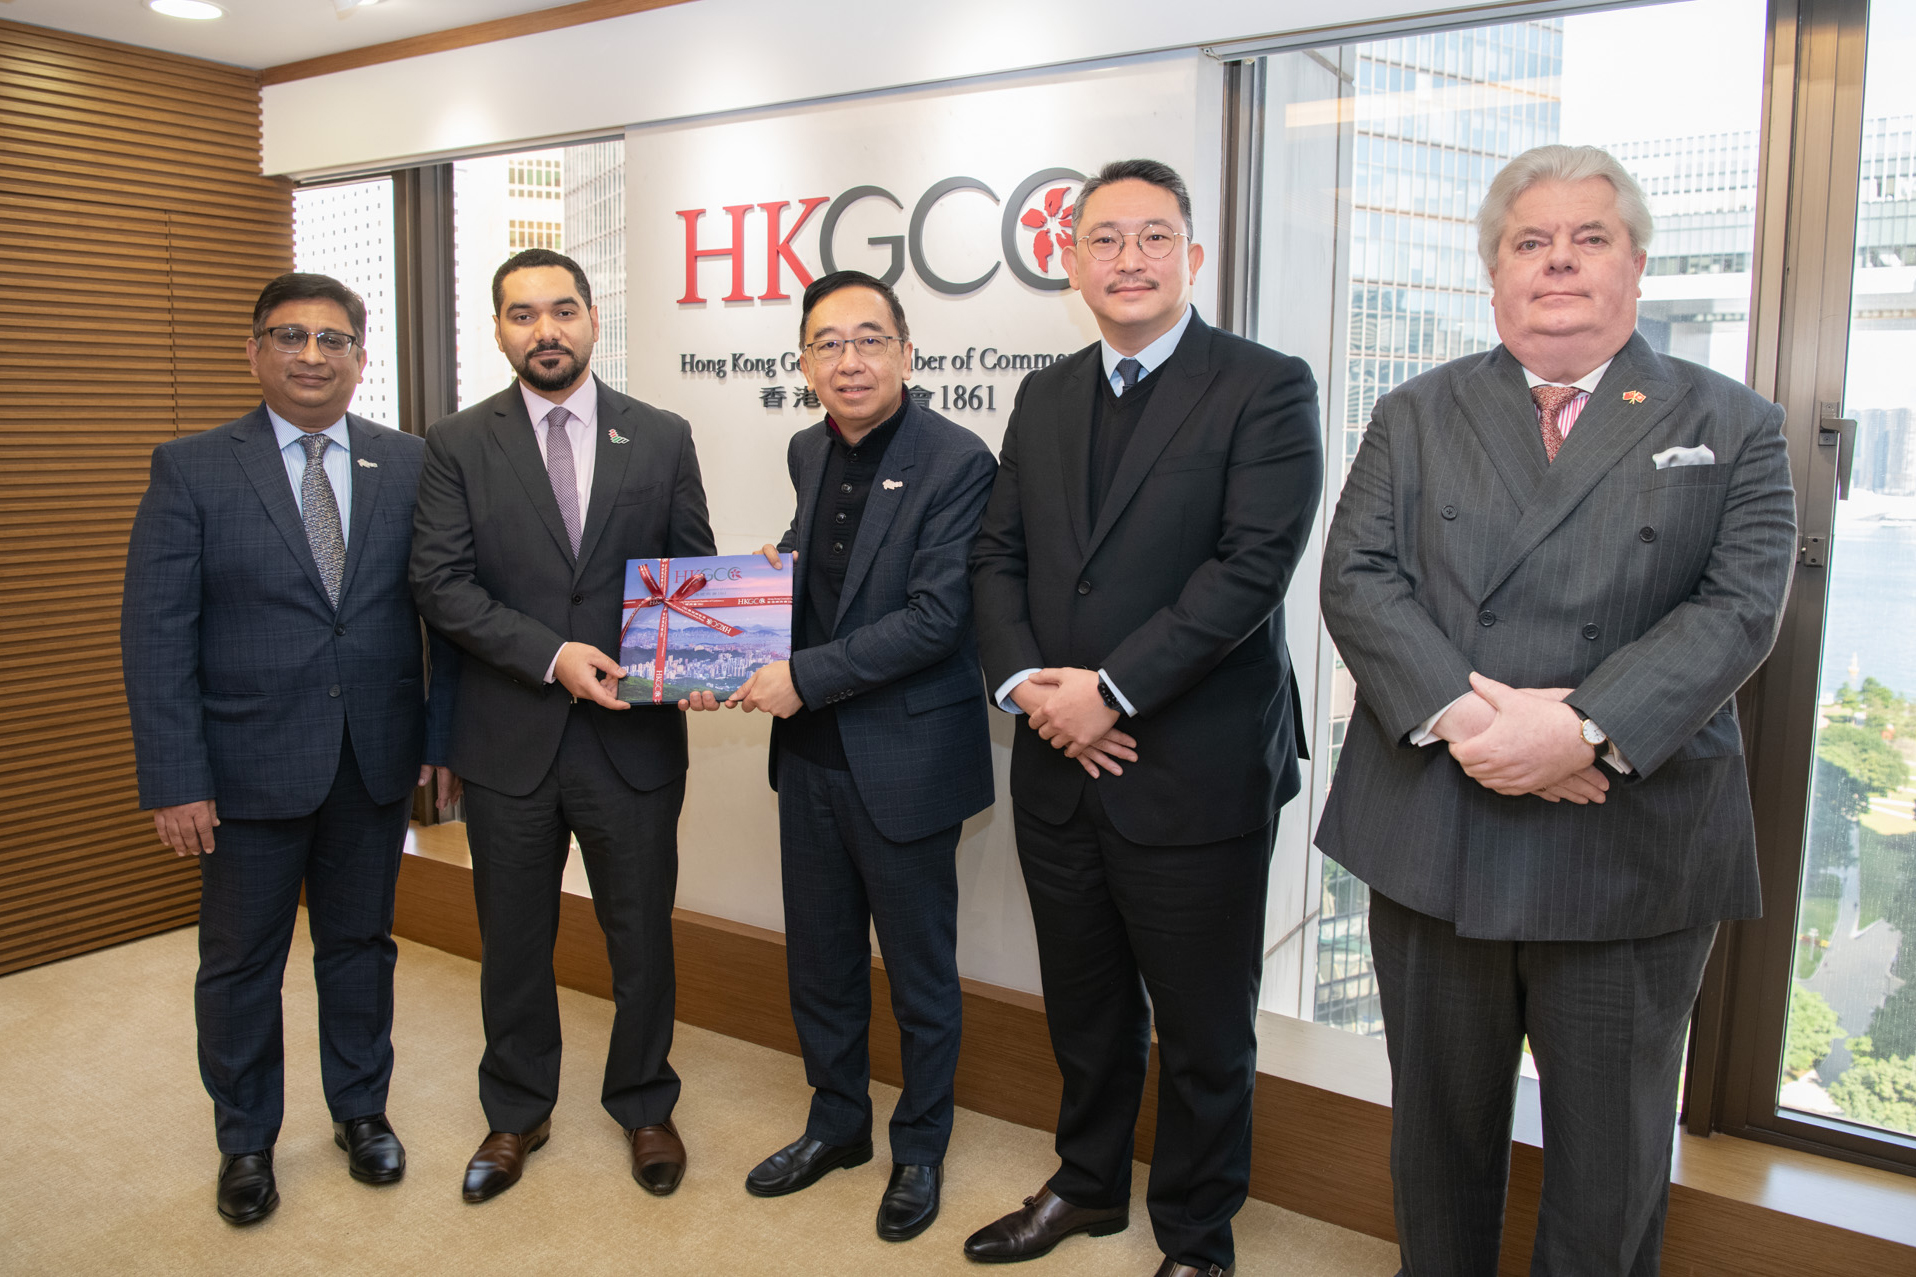 Photo of Shaikh Saoud Ali Almualla, Consul General of the United Arab Emirates, the Chamber CEO and leaders of the Chamber's Asia & Africa Committee